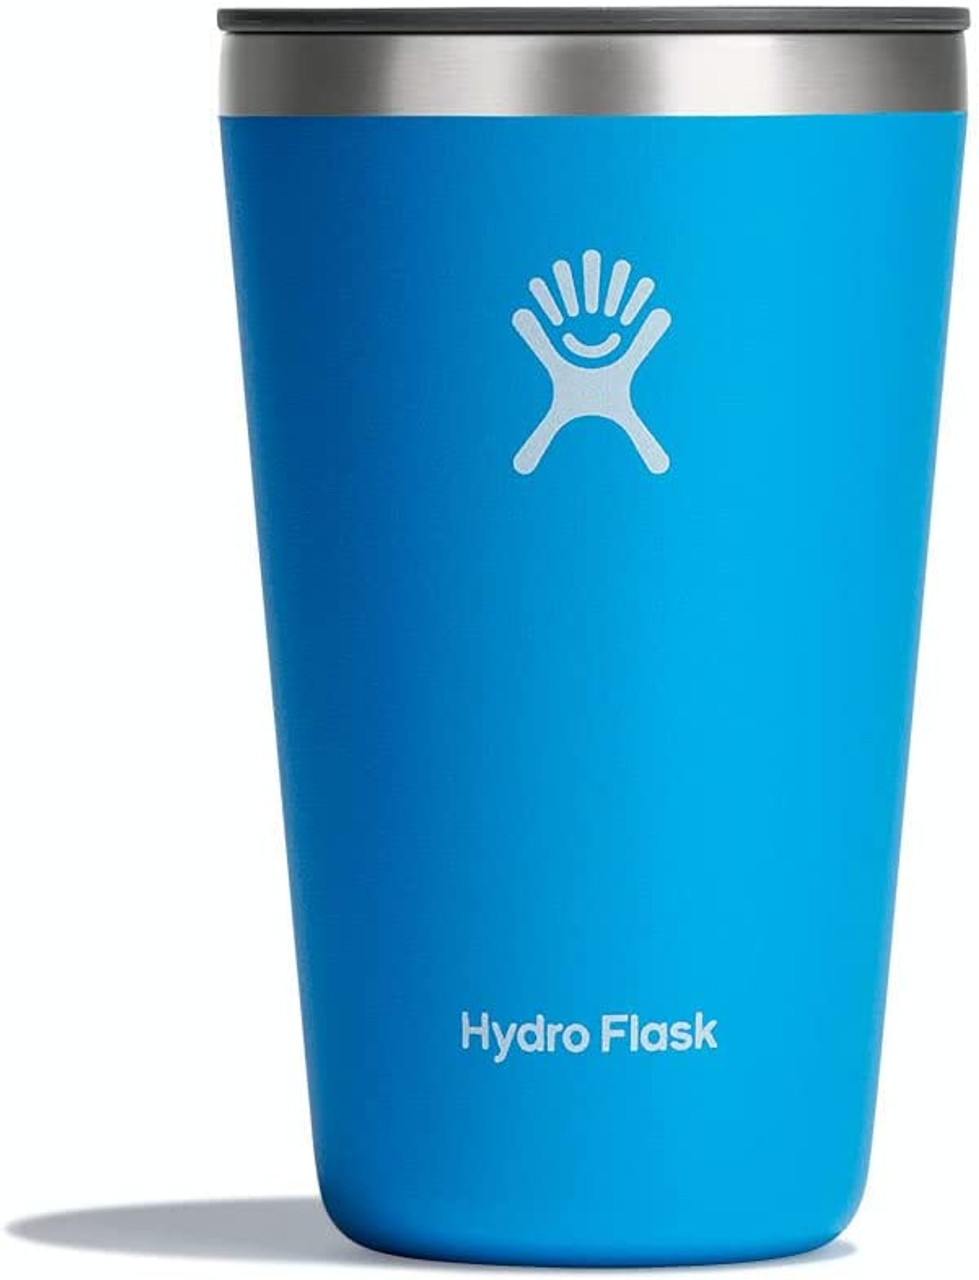  Hydro Flask Tumbler Cup - Stainless Steel & Vacuum Insulated -  Press-In Lid - 16 oz, Pacific : Home & Kitchen